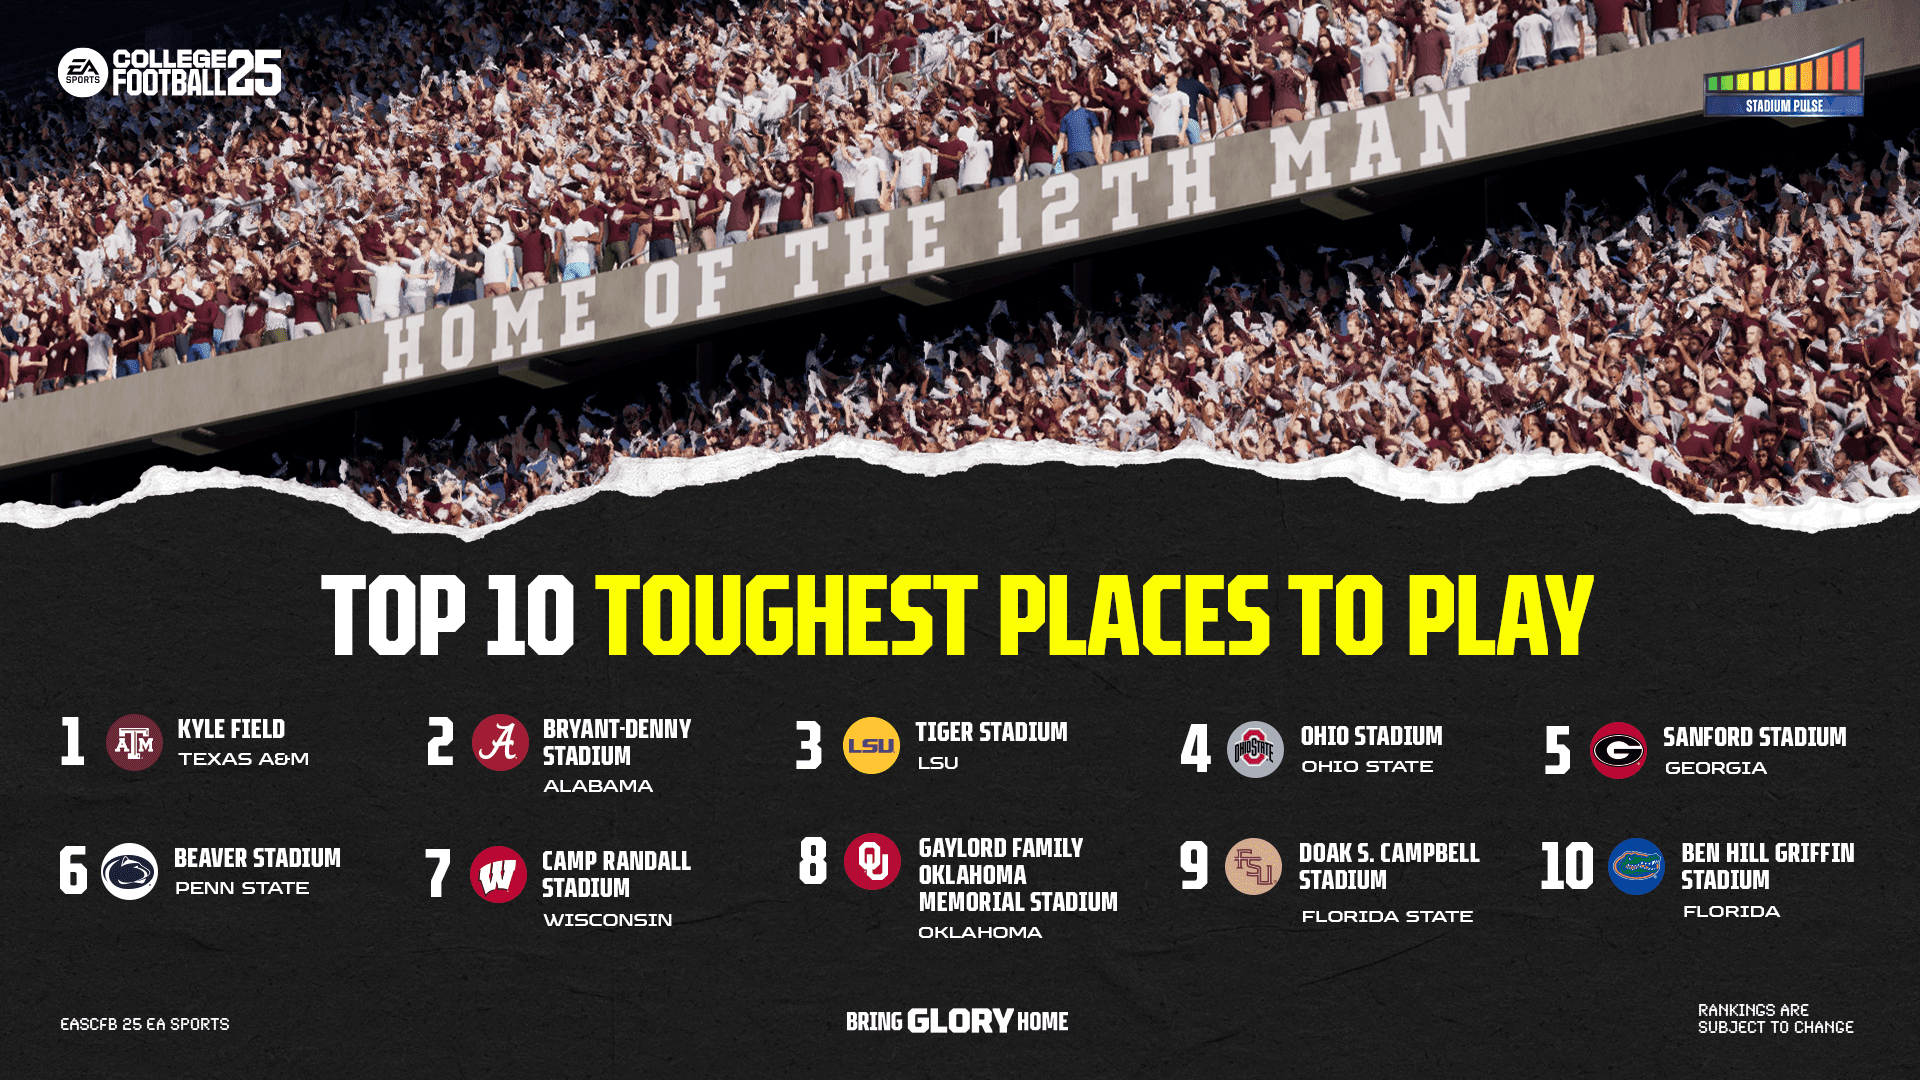 cfb25-top-10-toughest-places-to-play-16x9.png.adapt.1920w.png